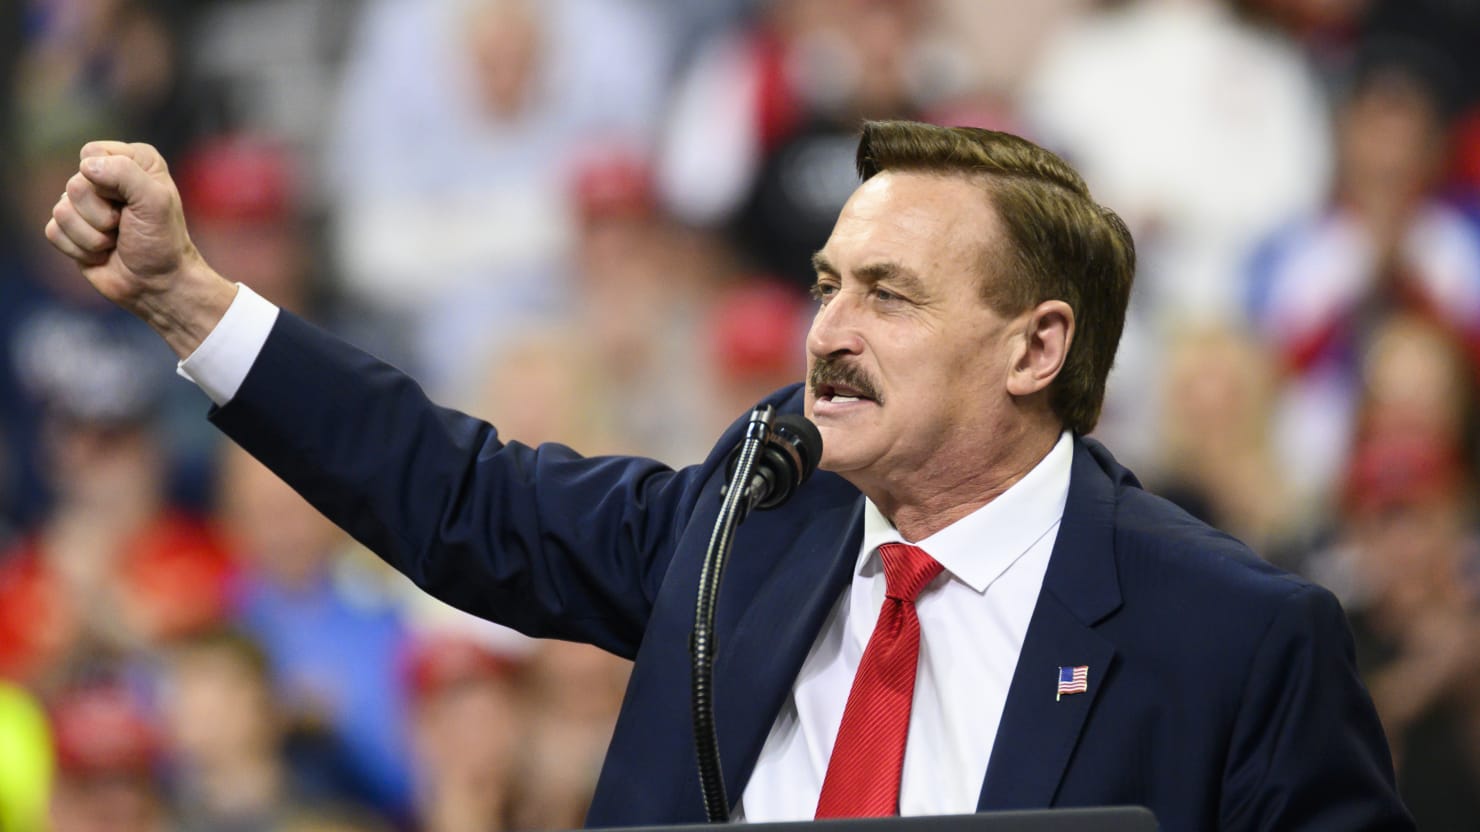 Mike Lindell, CEO of MyPillow, Tries to Launch a Social Media Site and That Has Already Created a Legal Threat